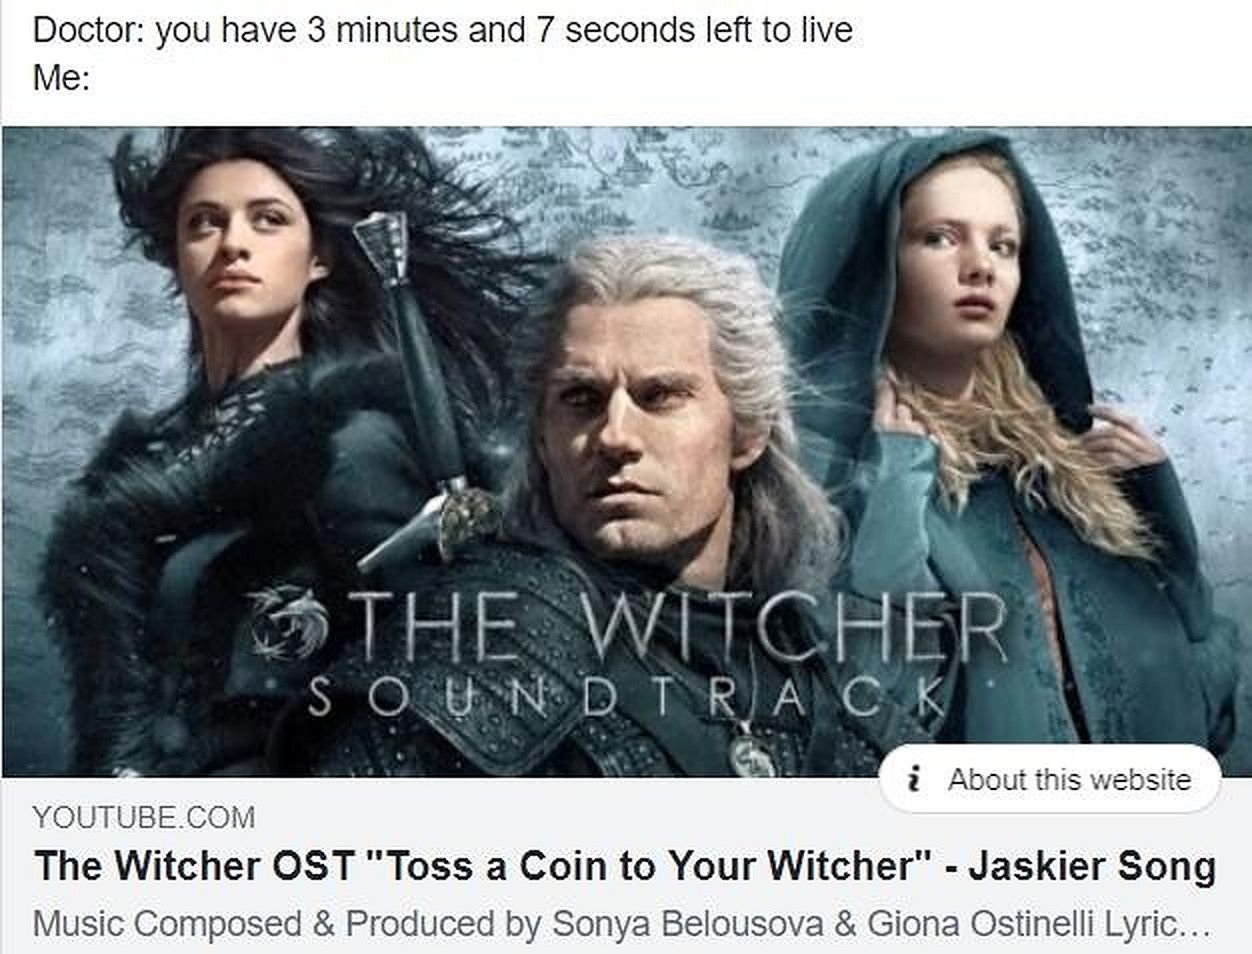 Toss A Coin To Your Witcher Meme